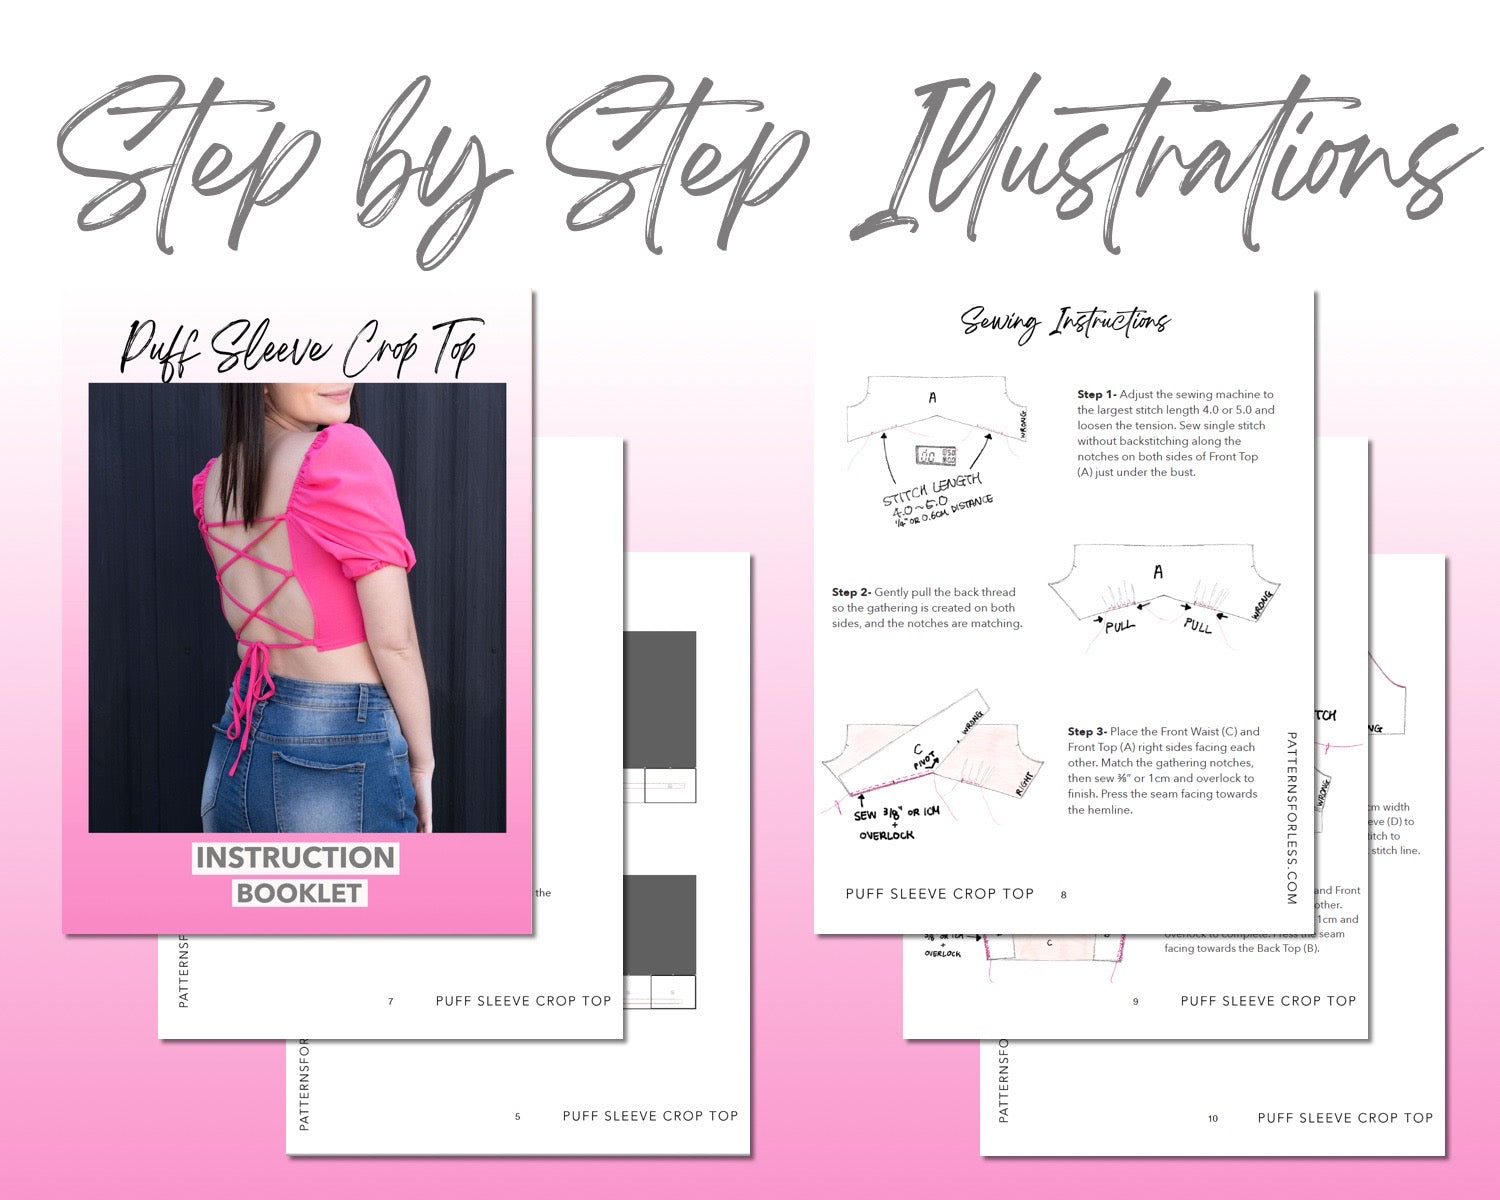 Puff Sleeve Laced Up Back Crop Top sewing pattern step by step illustrations.